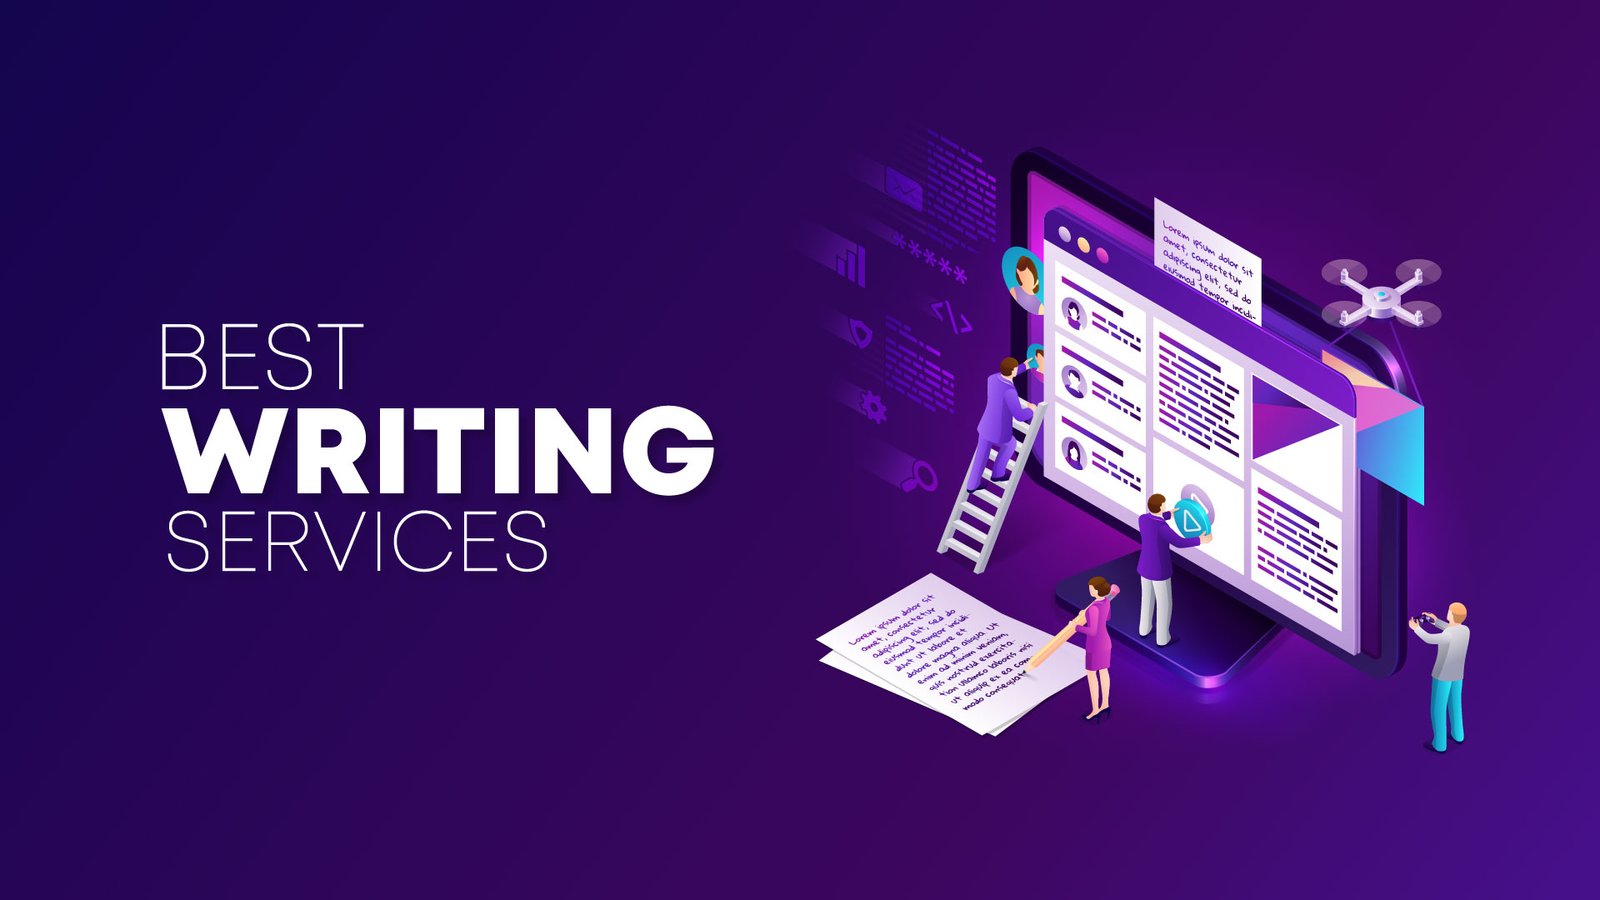 best writing services because we care